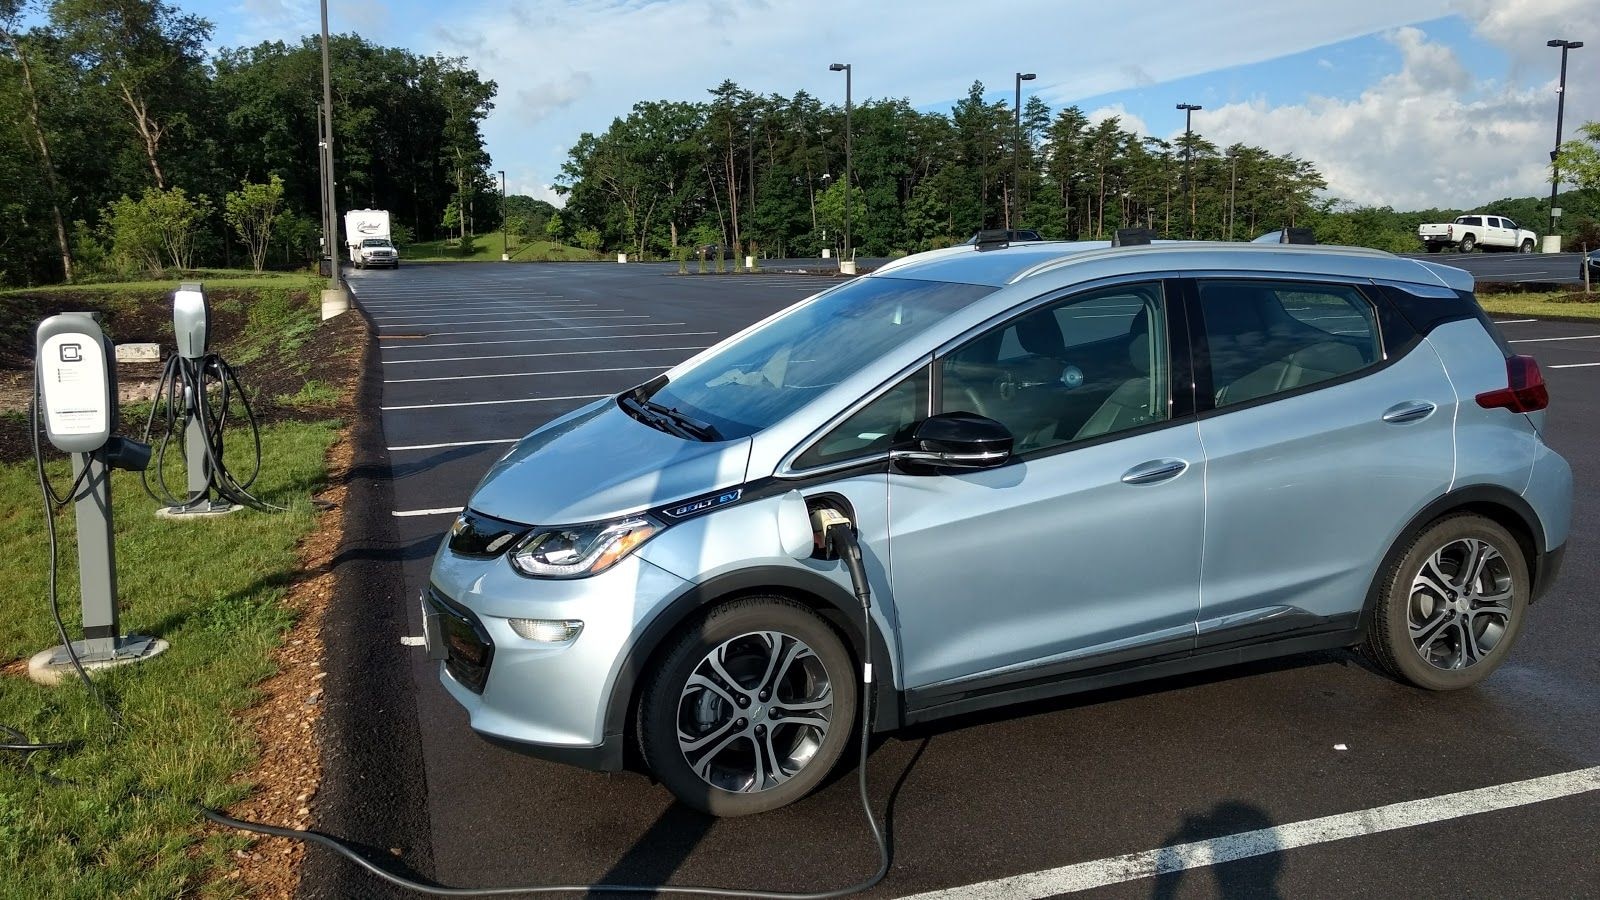 Charging Chevy Bolt EV before trip across Maryland   [image: Brian Ro]